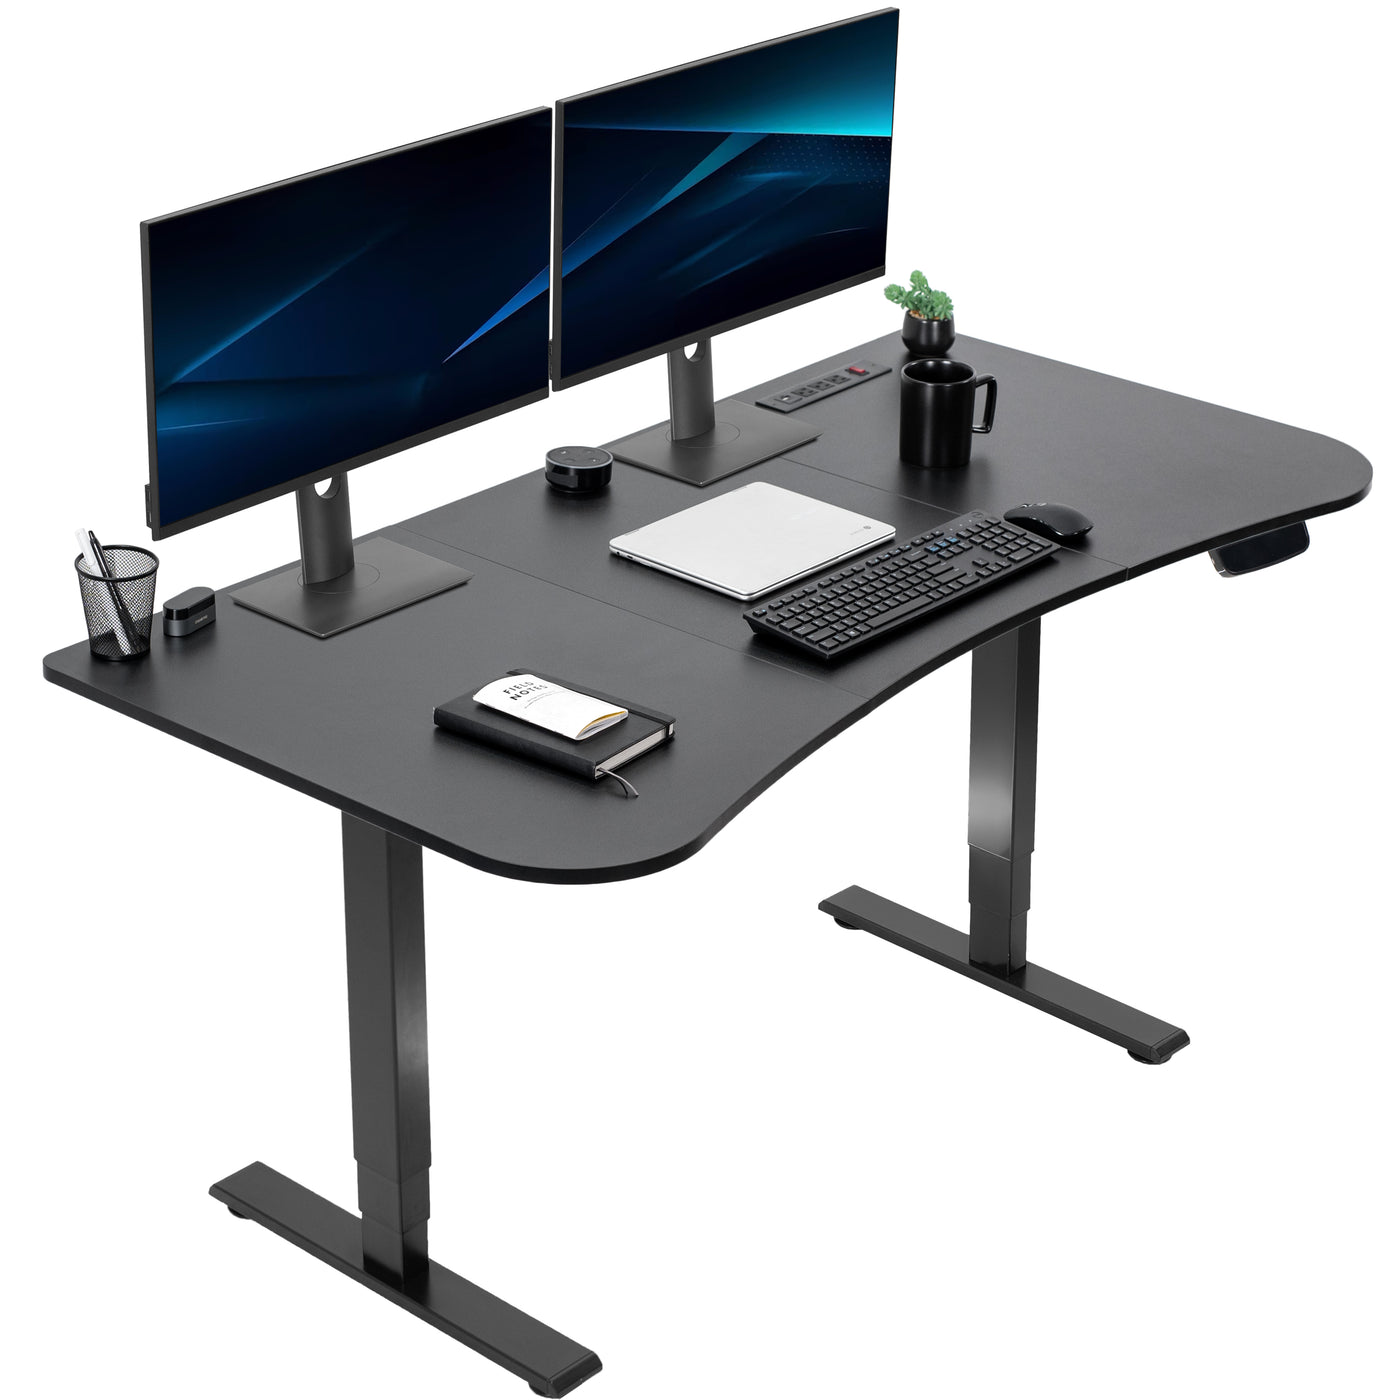 63” x 32” Electric Height Adjustable Stand Up Desk with Built-in Power Strip